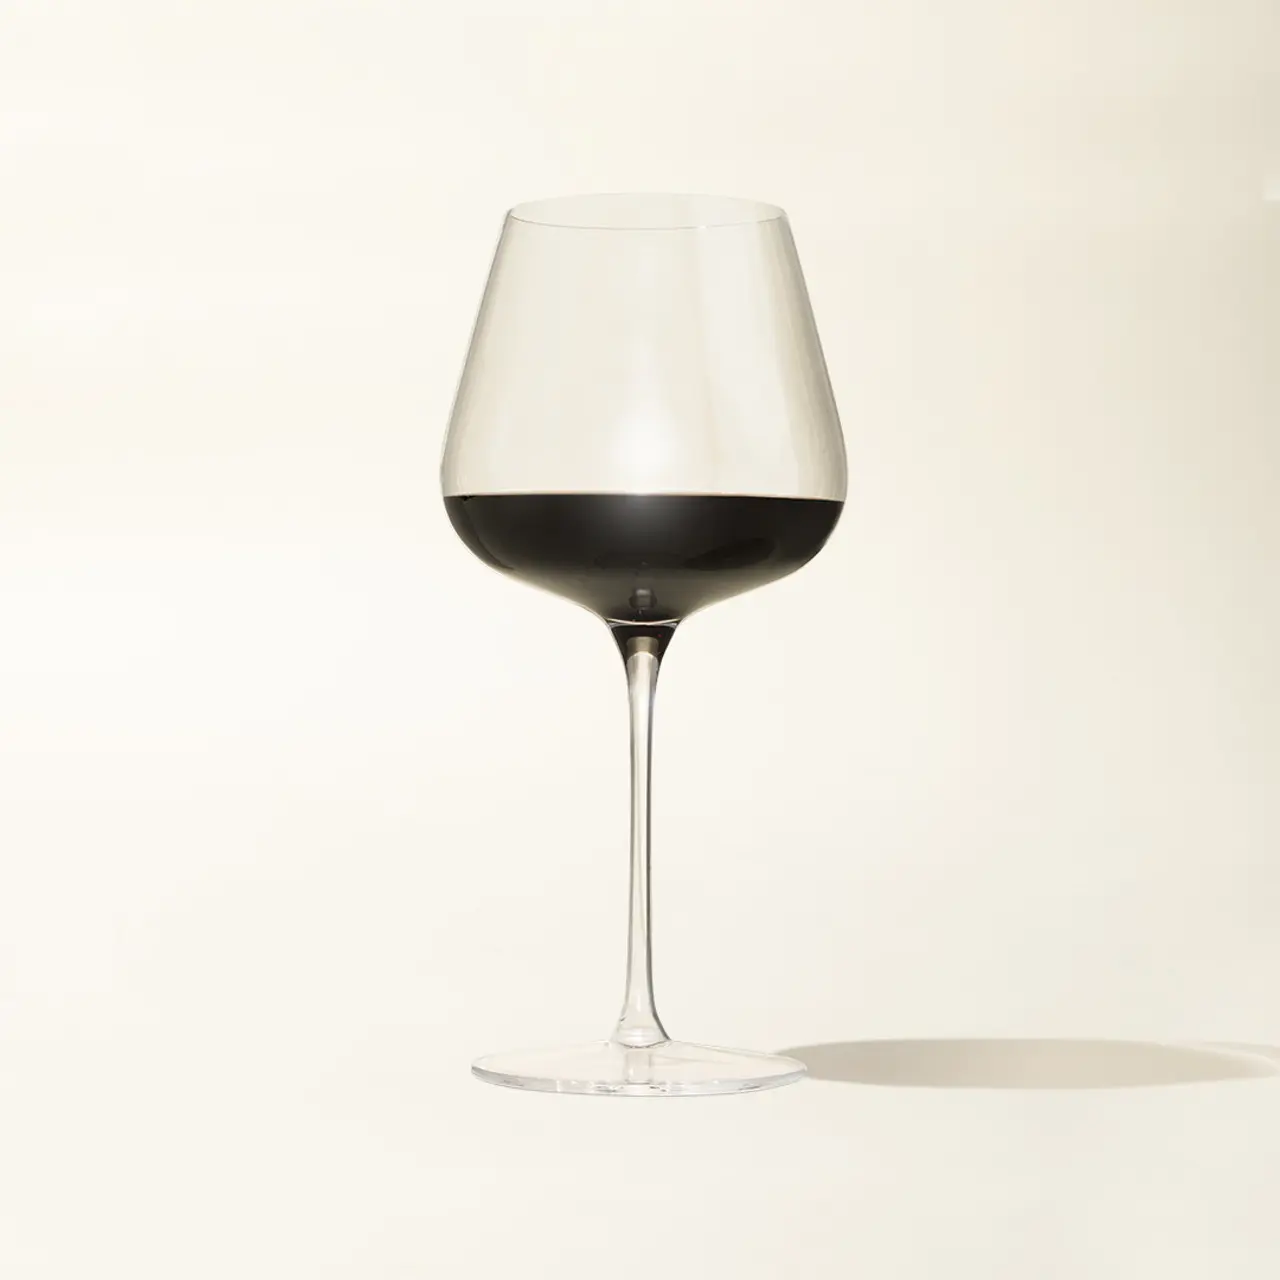 A wine glass filled with red wine is displayed against a plain beige background.